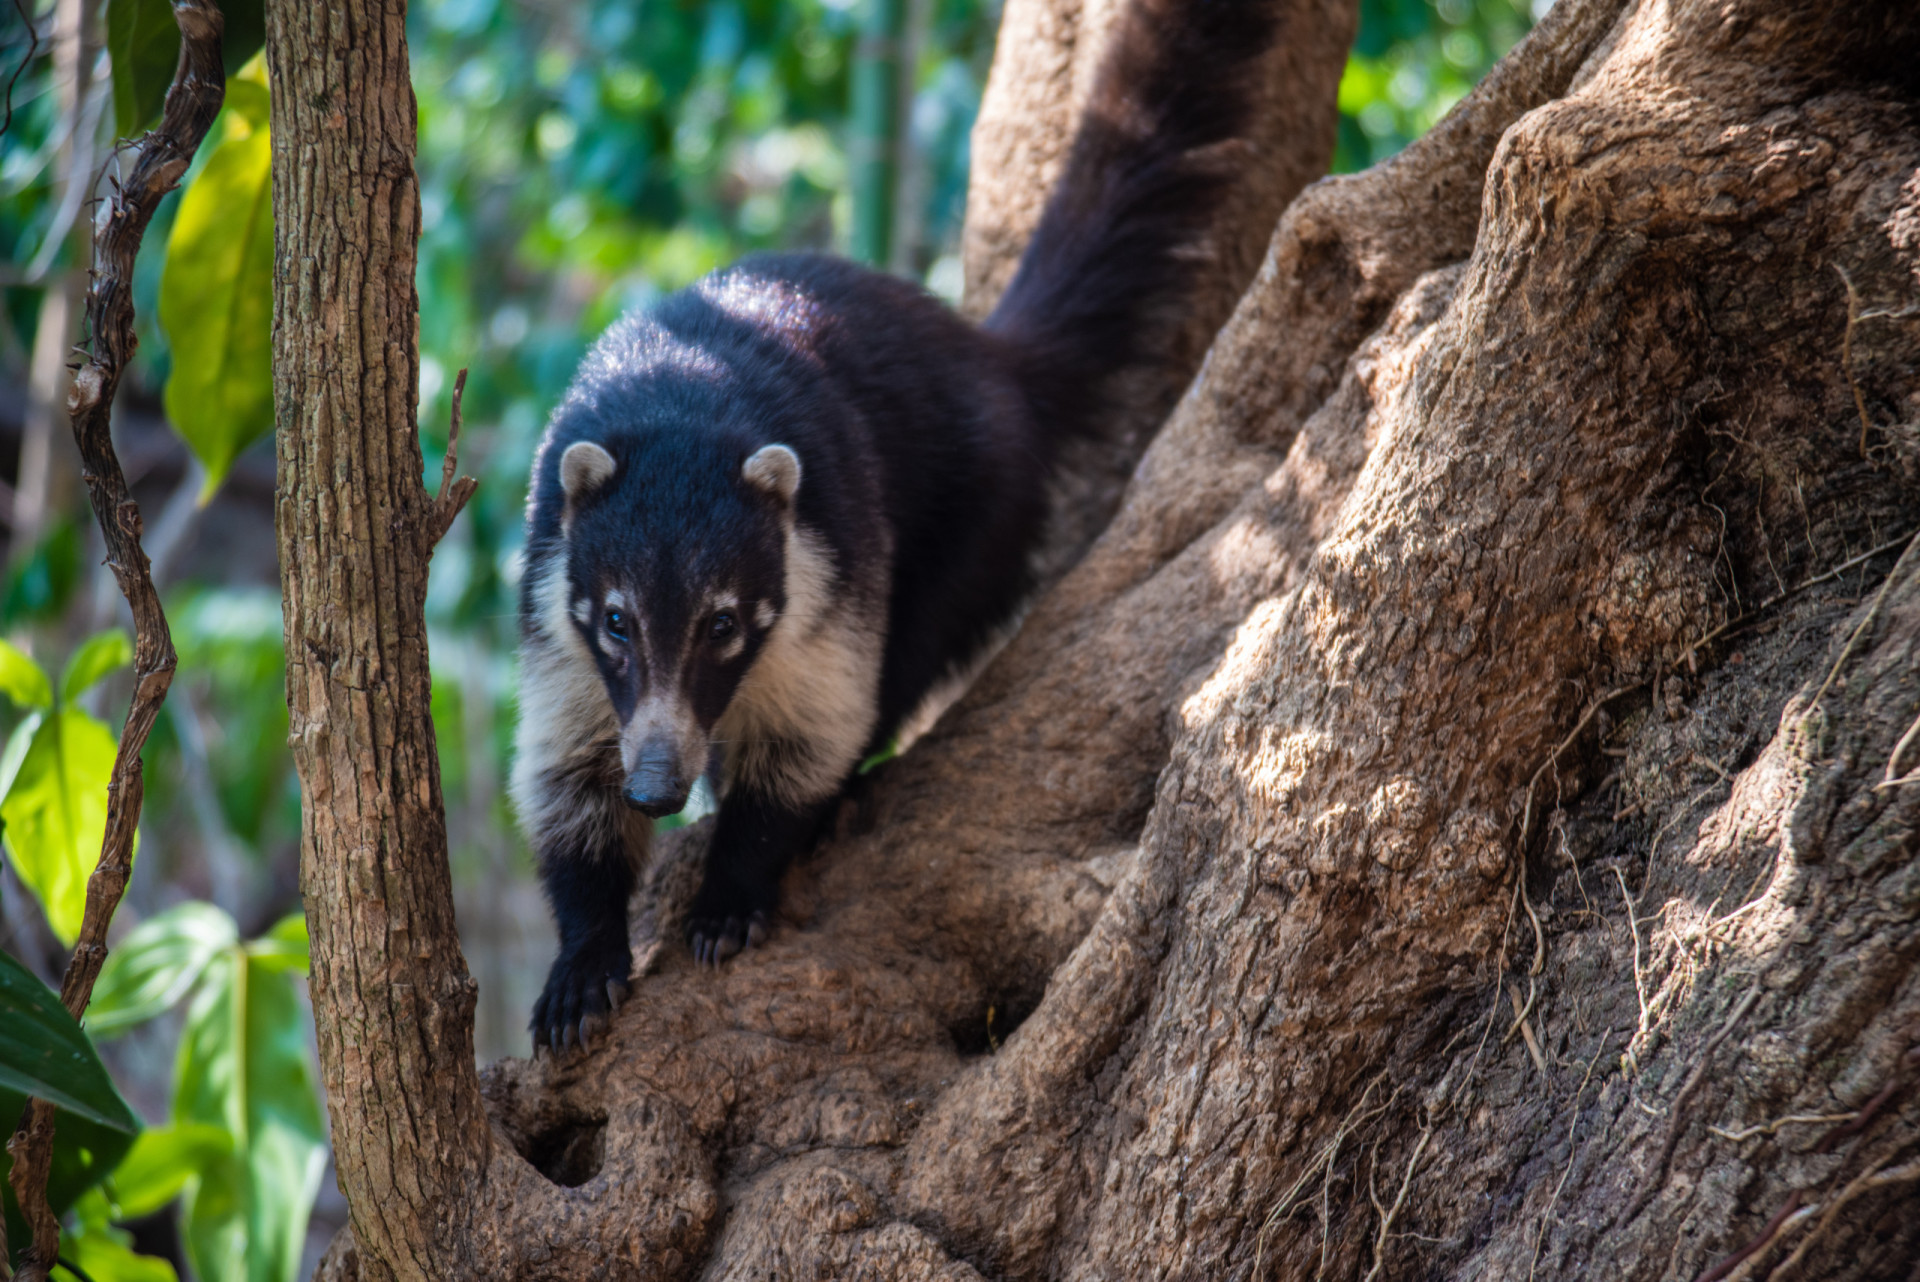 <p>Atitlán Natural Reserve is just a half hour drive from Panajachel town center, which makes it a wonderfully convenient choice for anyone hoping to spot the playful white-nosed coati (pictured), a relative of the raccoon. The reserve also serves as an extraordinary gateway to the magnificent Lake Atitlán and its spectacular volcanoes.</p>